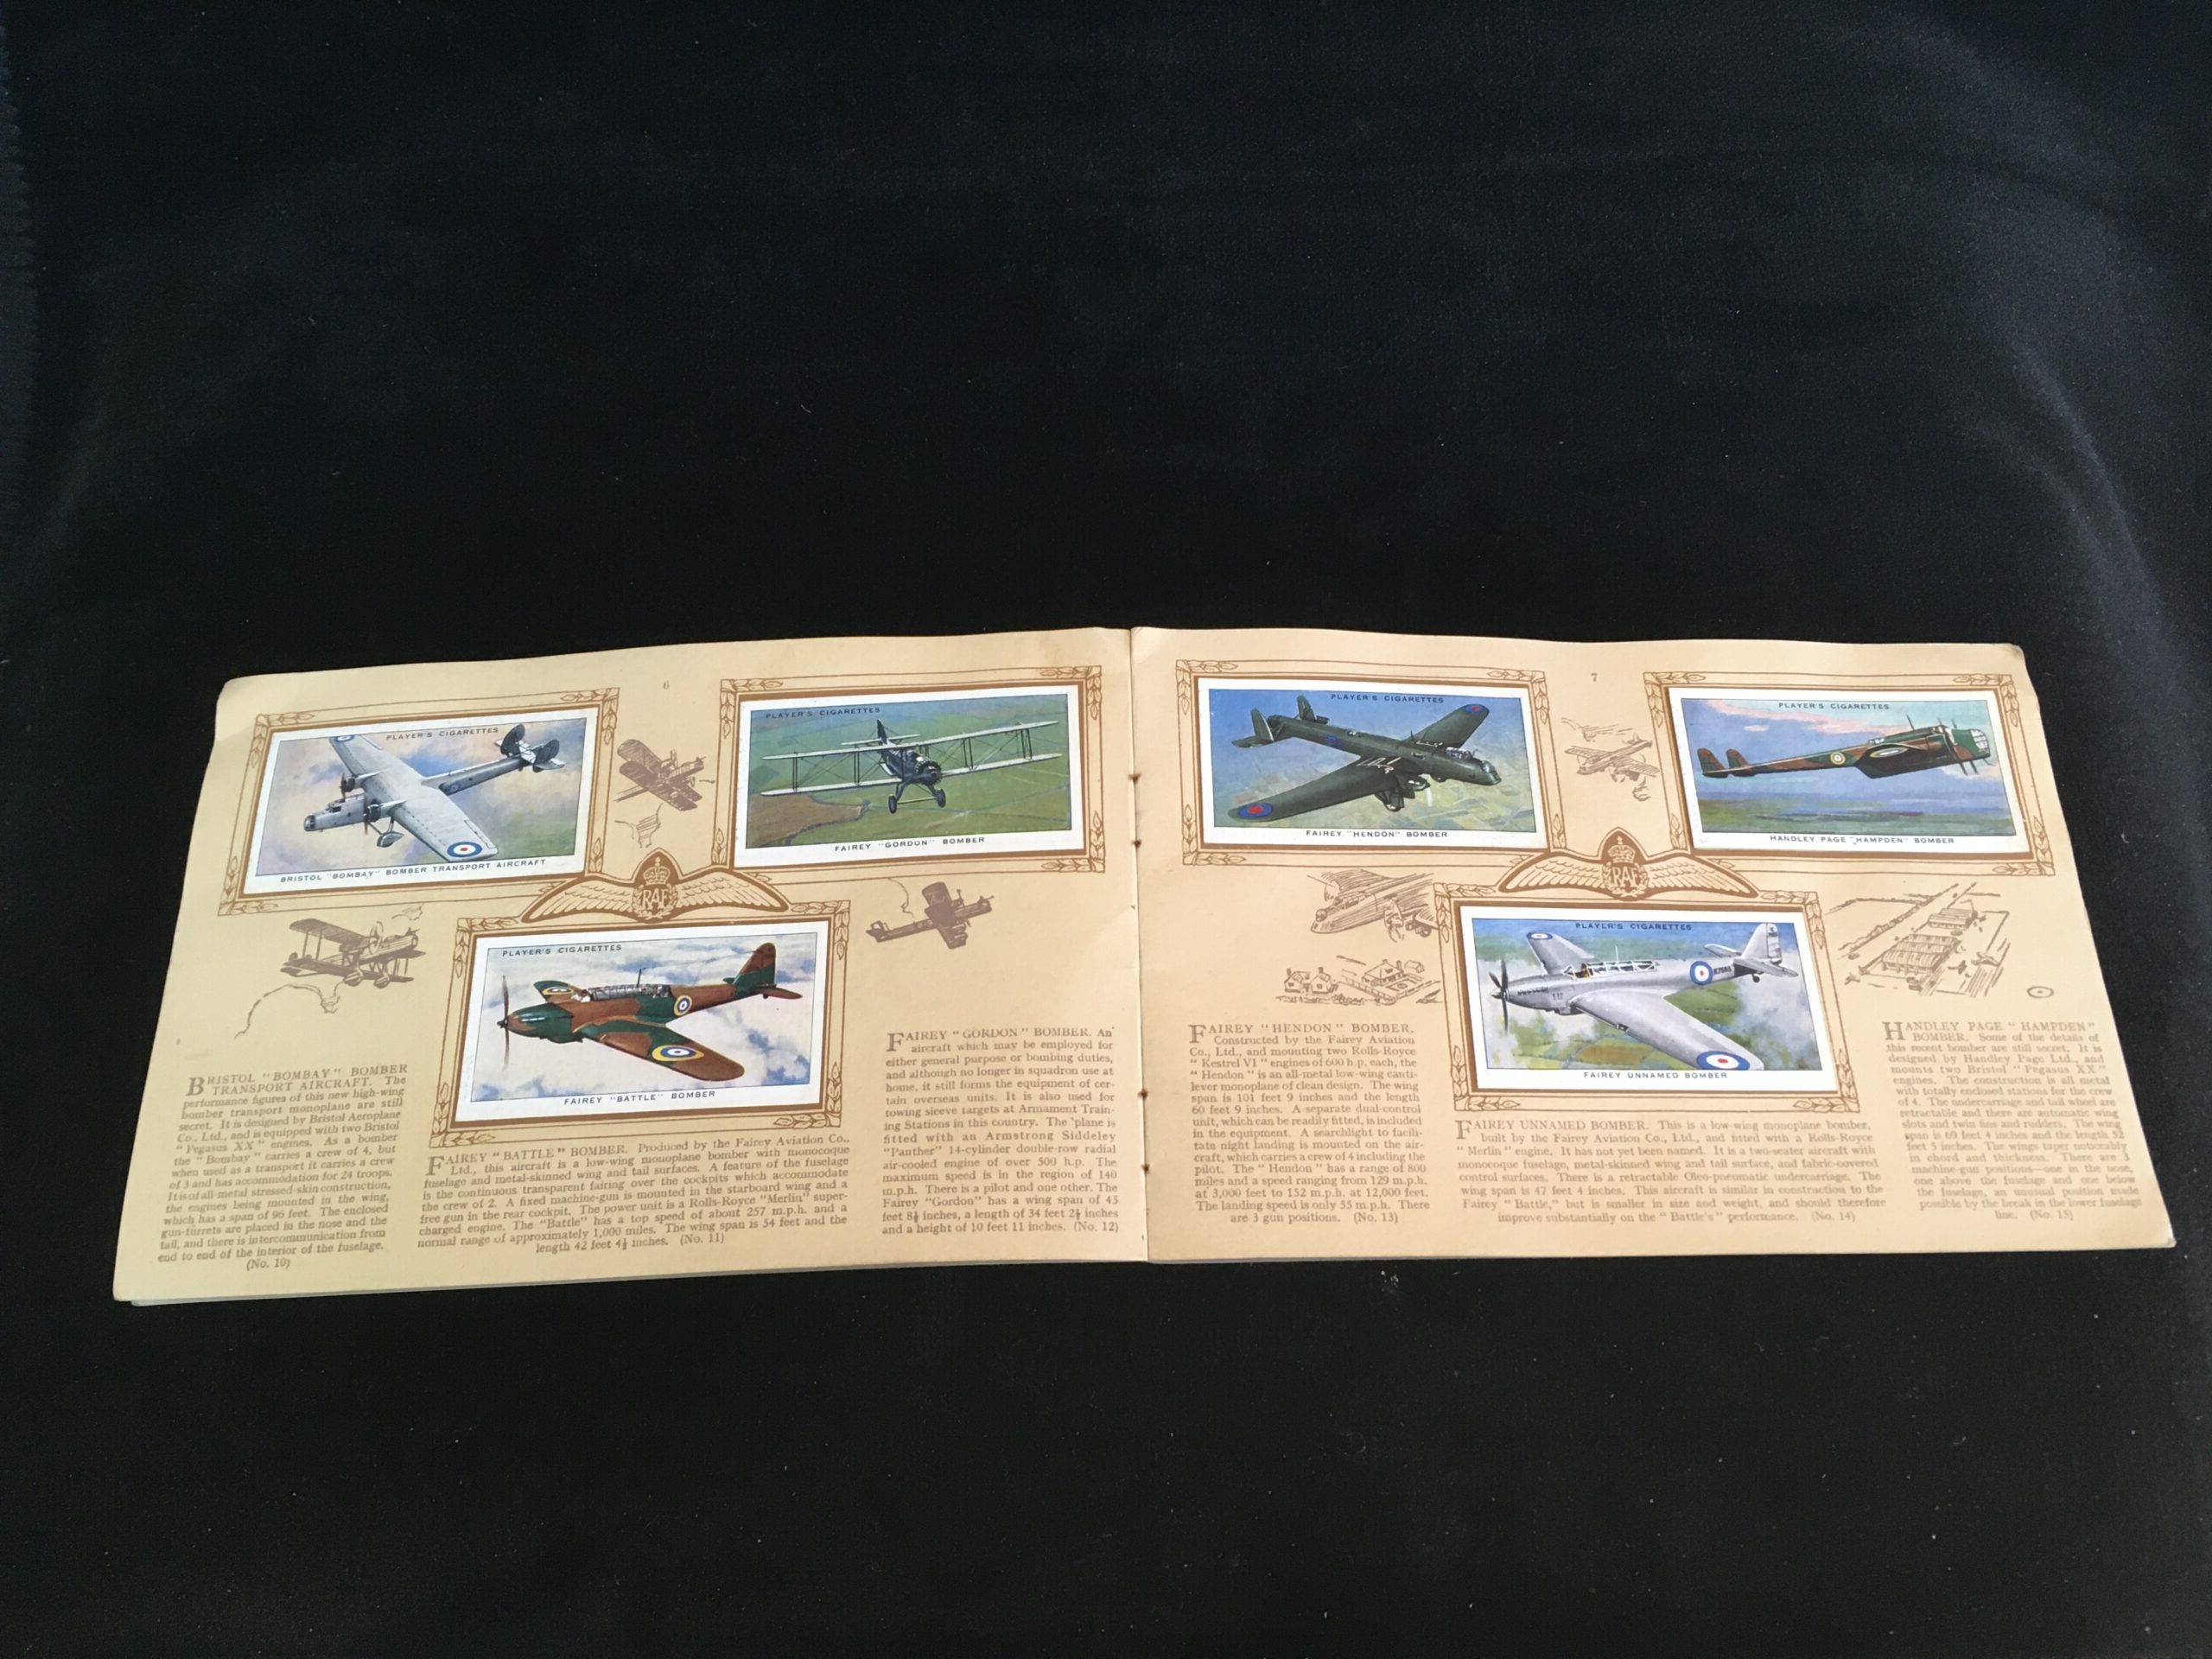 Aircraft of the Royal Air Force - 1938 - Cigarette cards | Trade cards ...